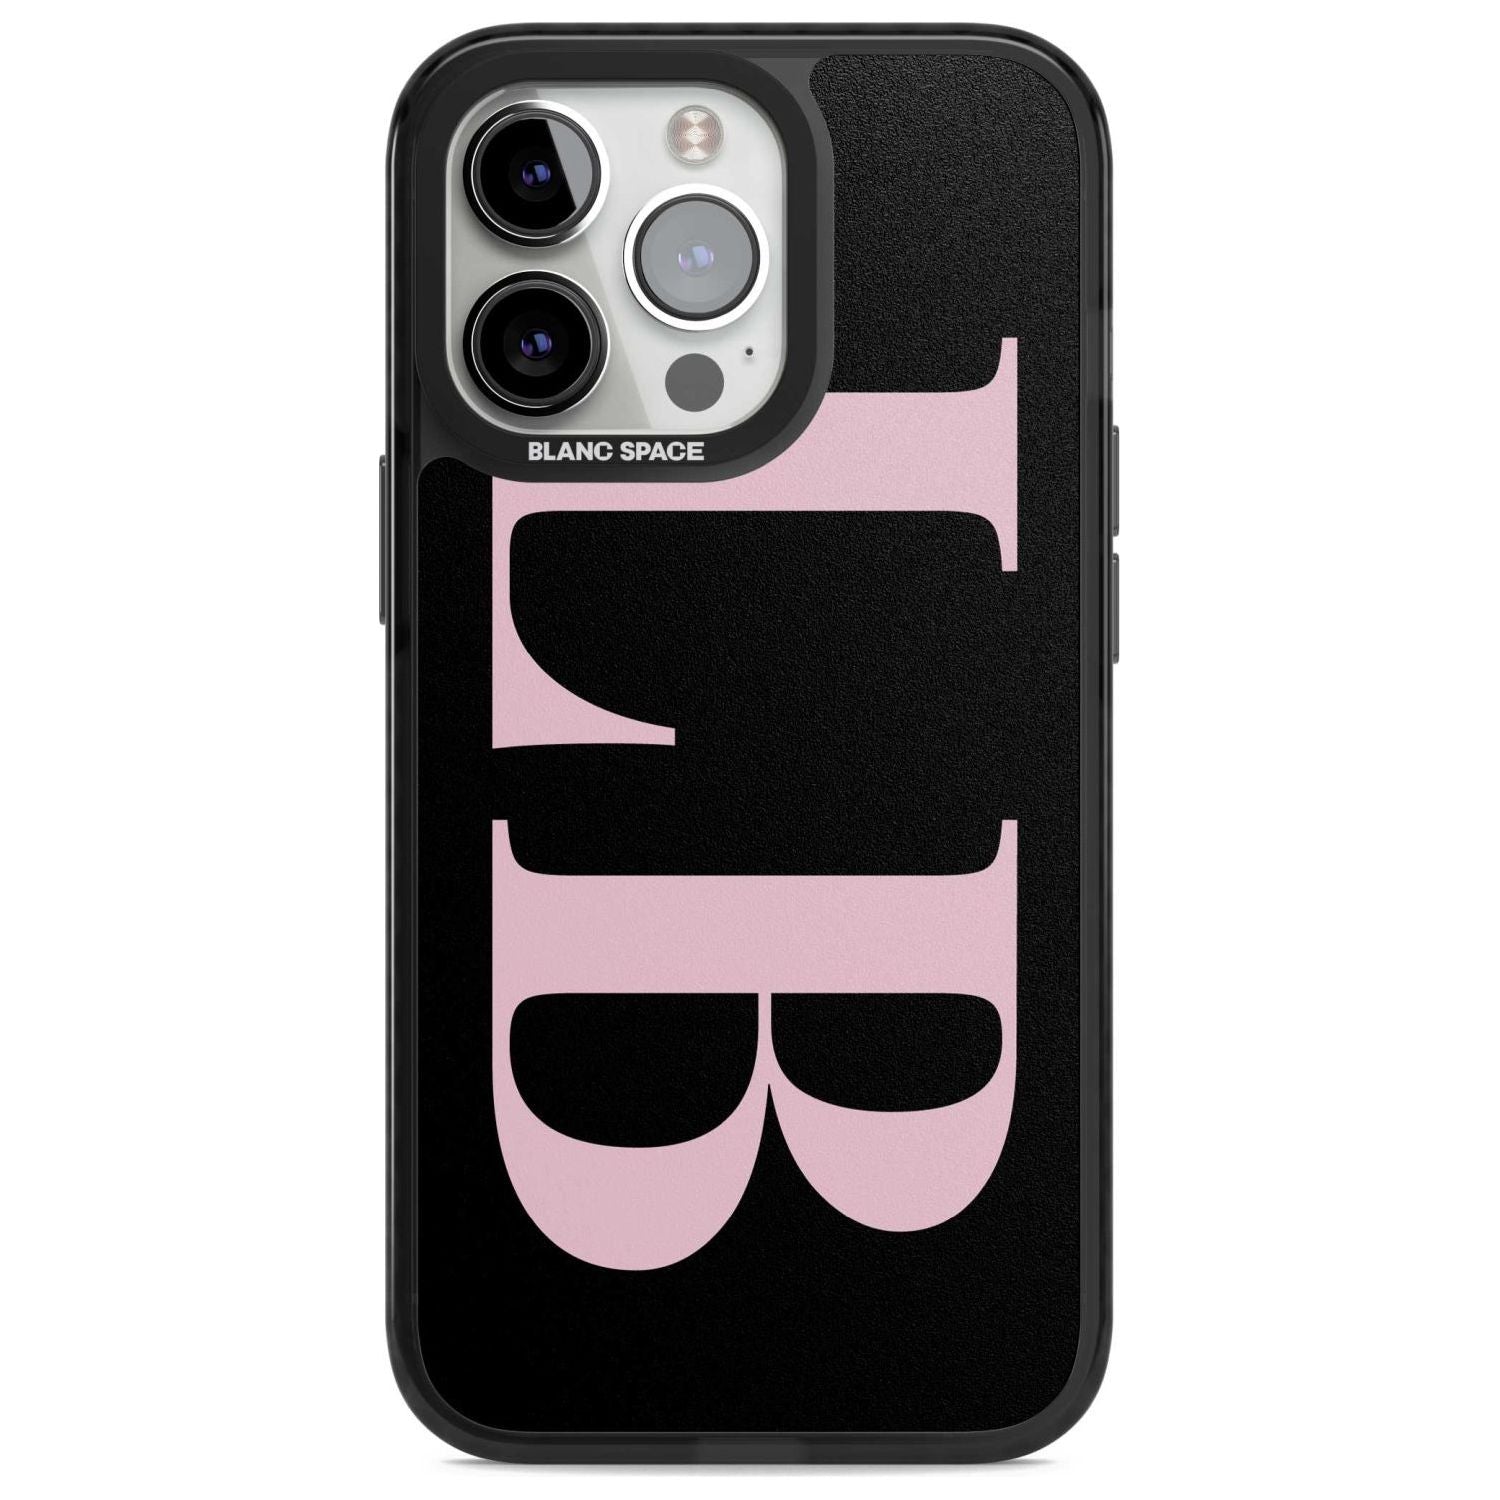 Personalised Pink & Black Letters Custom Phone Case iPhone 15 Pro Max / Magsafe Black Impact Case,iPhone 15 Pro / Magsafe Black Impact Case,iPhone 14 Pro Max / Magsafe Black Impact Case,iPhone 14 Pro / Magsafe Black Impact Case,iPhone 13 Pro / Magsafe Black Impact Case Blanc Space